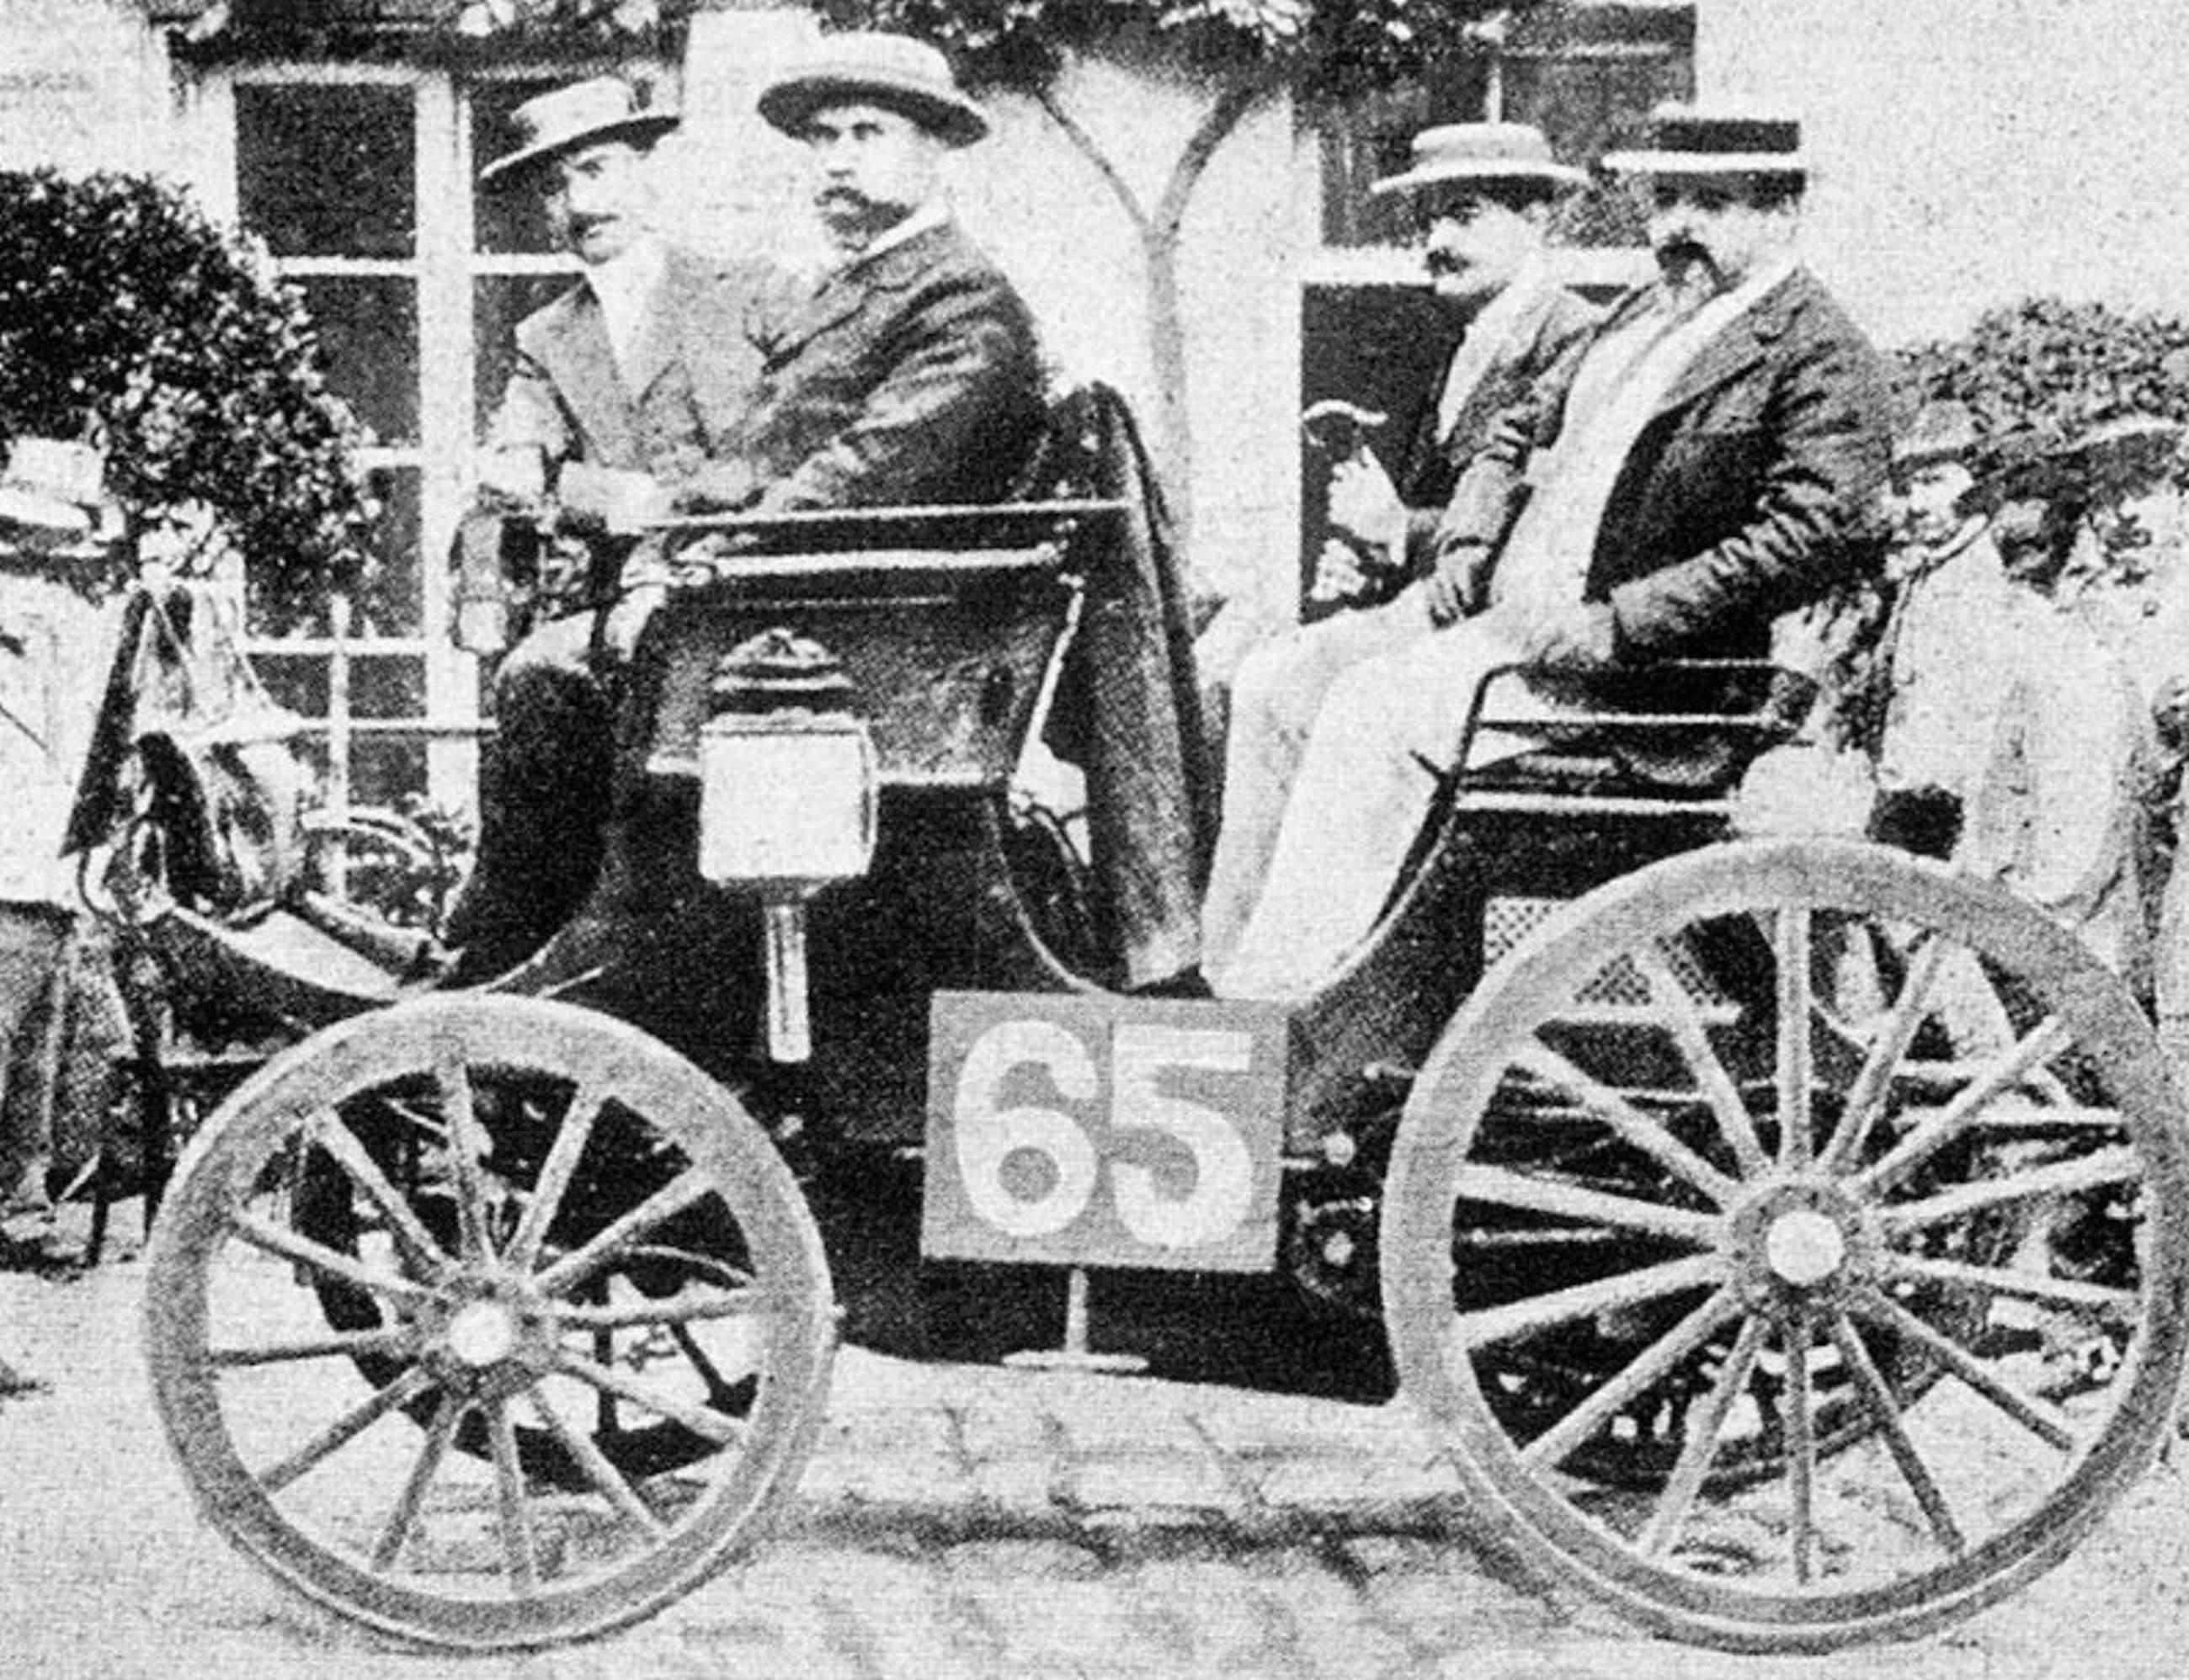 Albert Lemaitre (left), ‘on’ his Peugeot Type 7, finished second in the pioneering 1894 Paris-Rouen Trial. Images courtesy of the GP Library. 